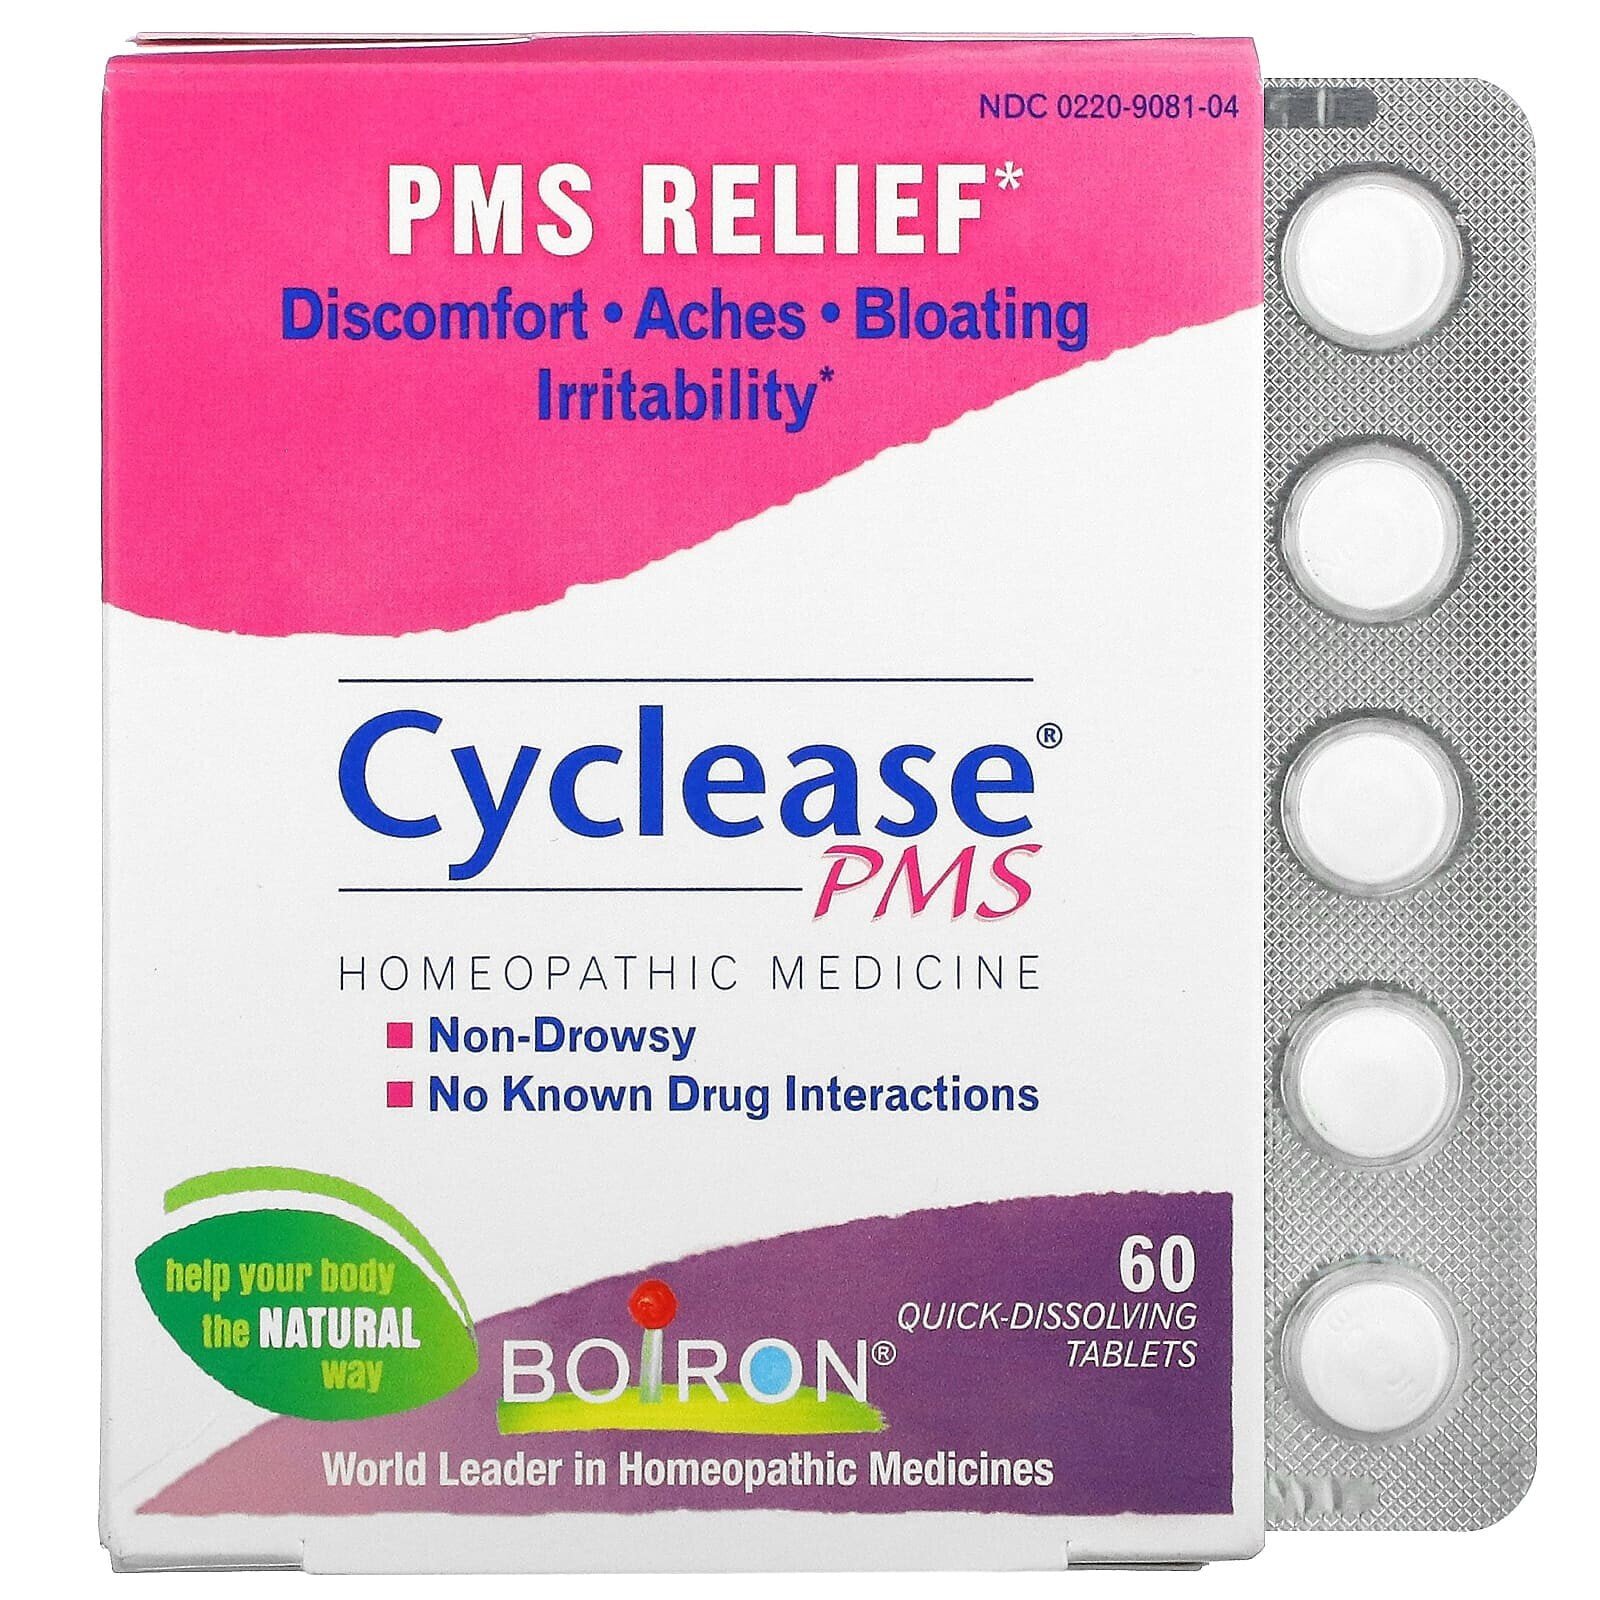 Cyclease PMS, 60 Quick-Dissolving Tablets